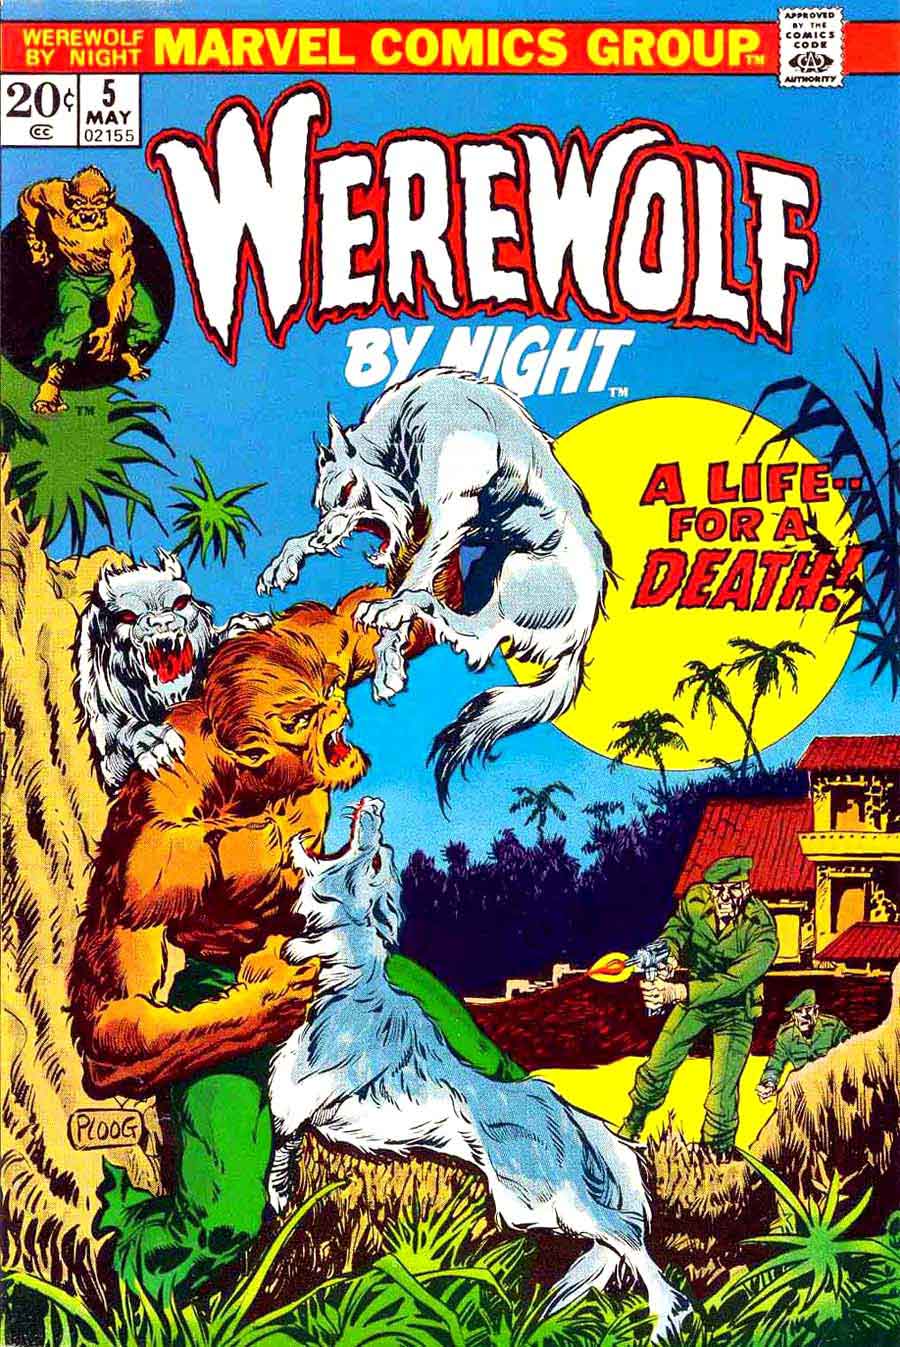 Werewolf by Night v1 #5 1970s marvel comic book cover art by Mike Ploog